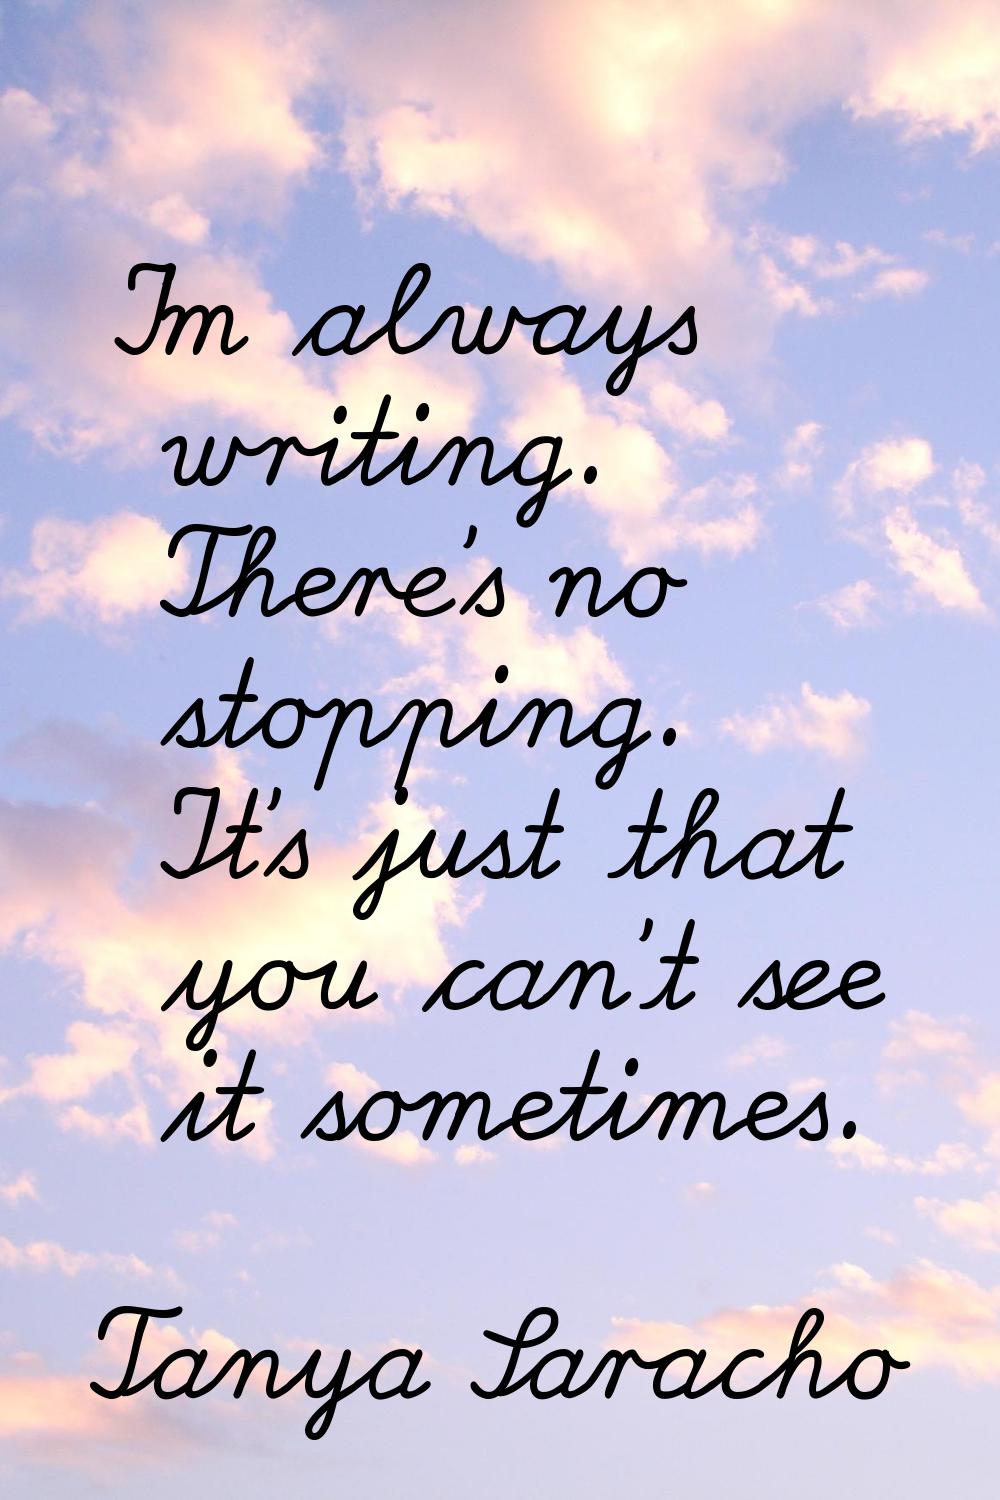 I'm always writing. There's no stopping. It's just that you can't see it sometimes.